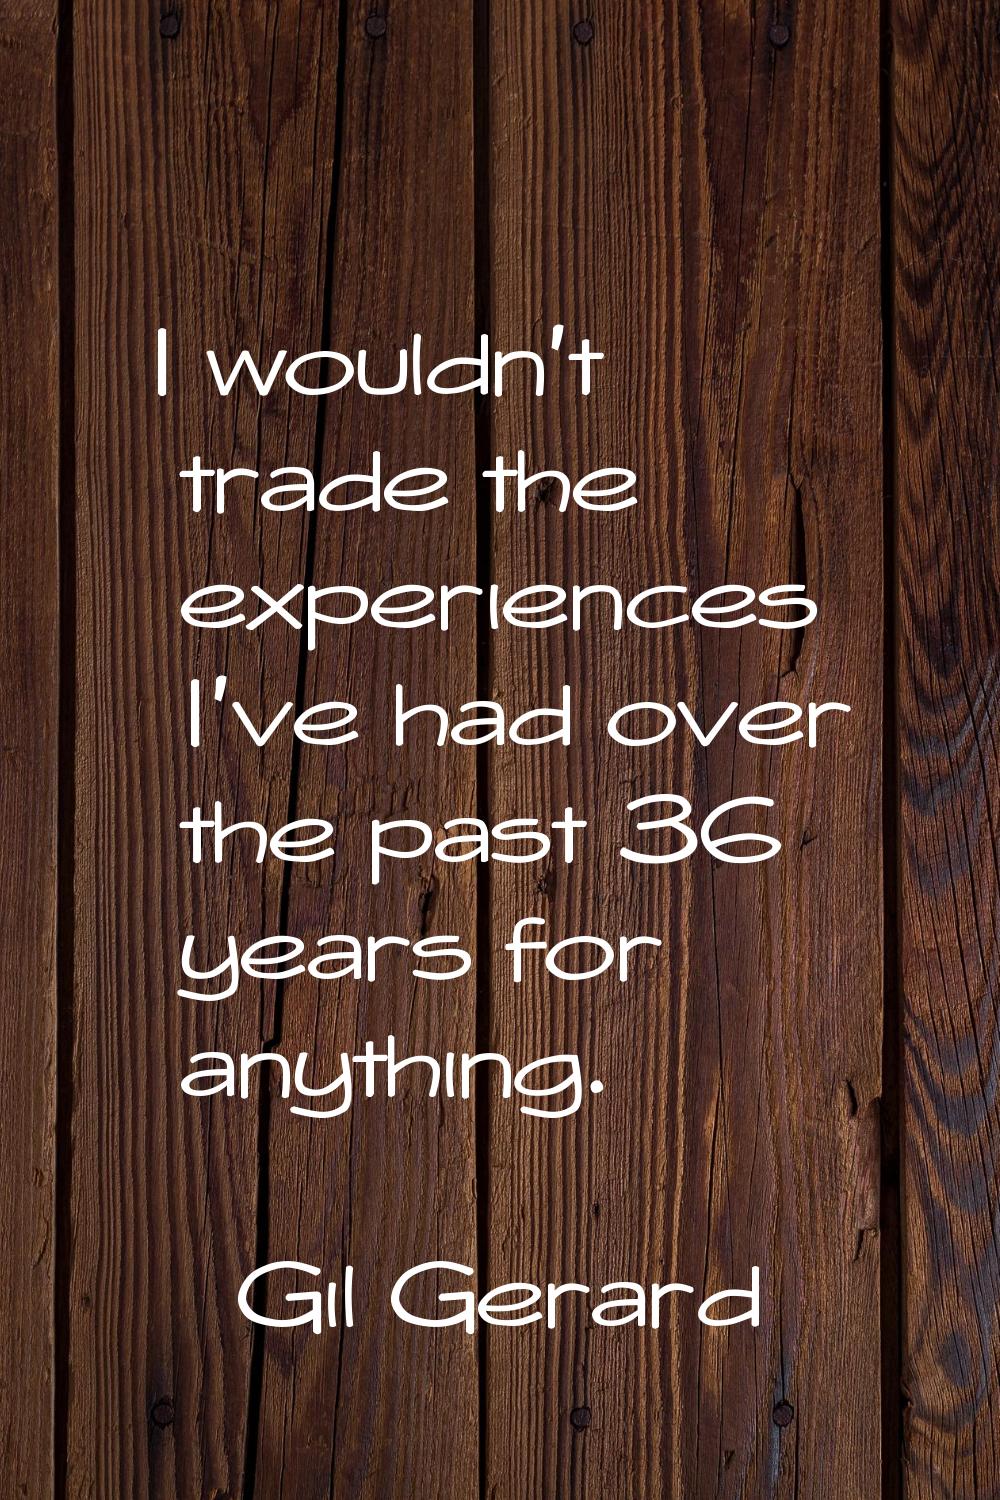 I wouldn't trade the experiences I've had over the past 36 years for anything.